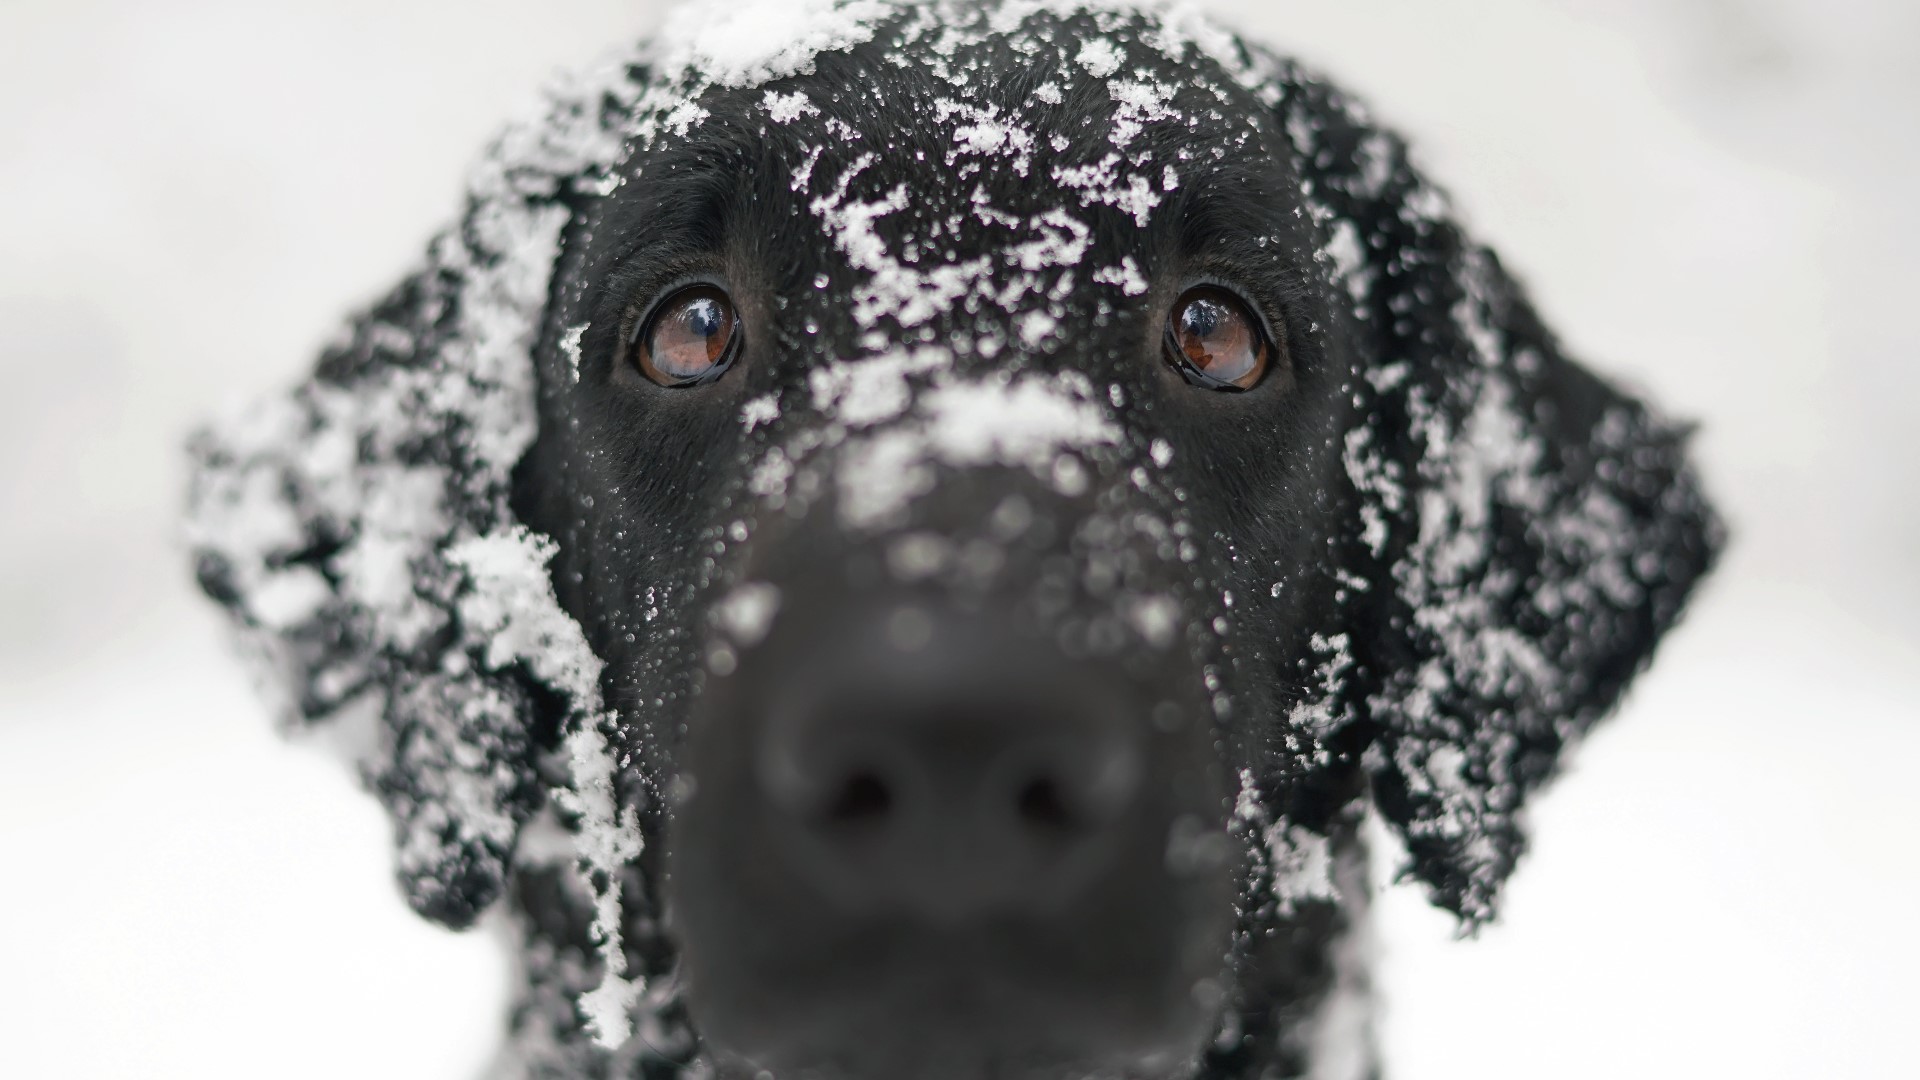 Since the bitter cold can be life-threatening for pets, it's important to know how to best take care of your furry friends.